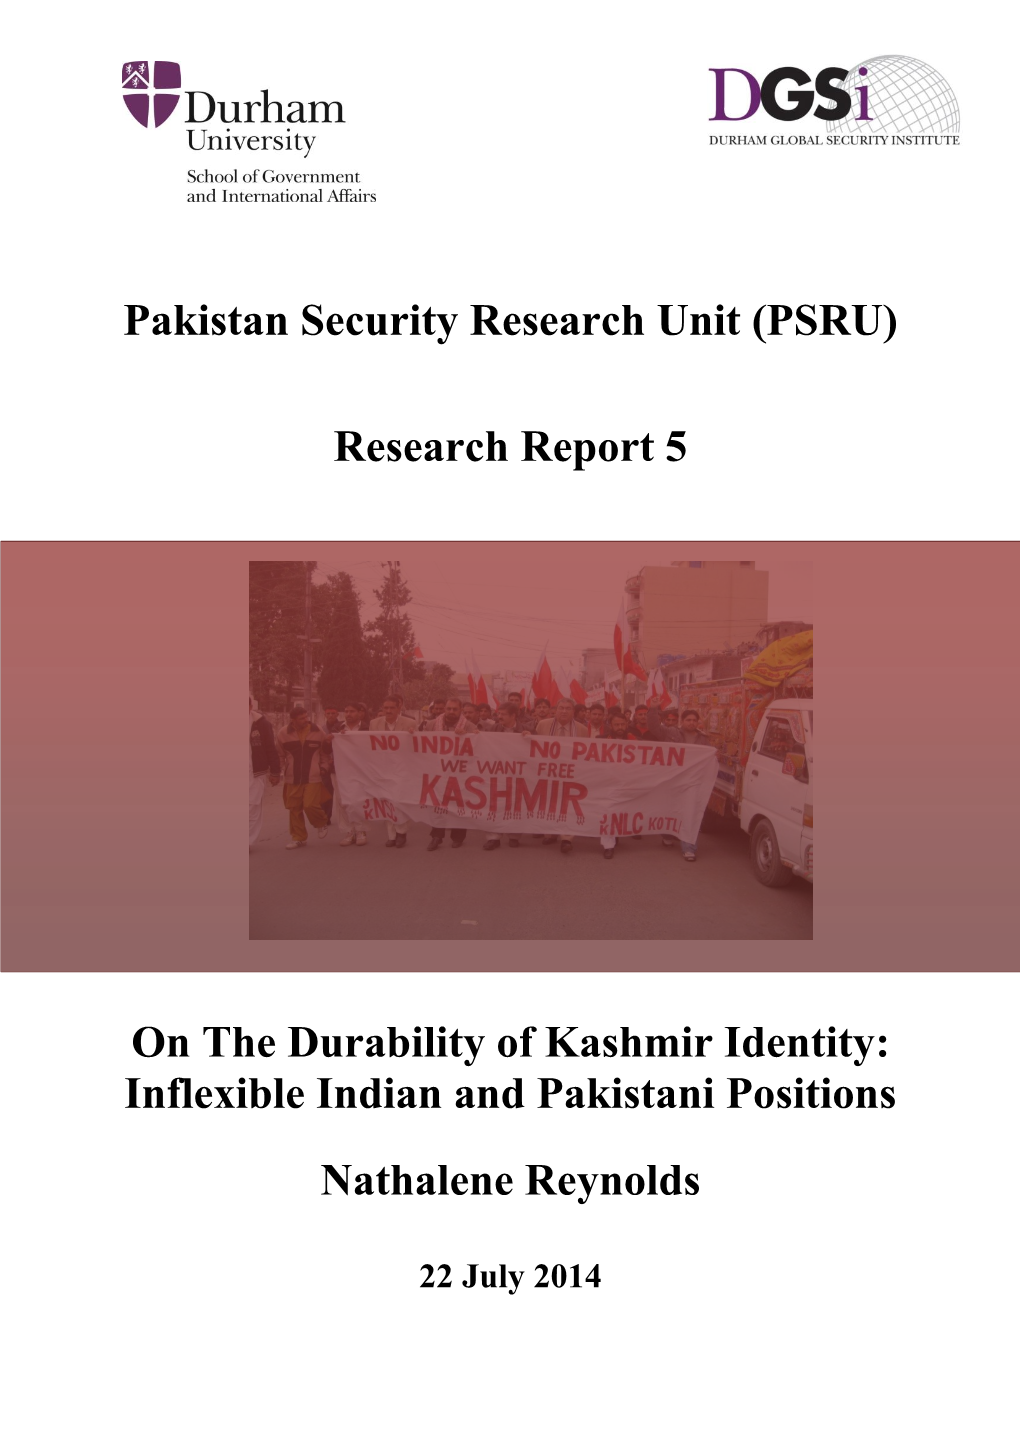 Pakistan Security Research Unit (PSRU) Research Report 5 on the Durability of Kashmir Identity: Inflexible Indian and Pakistani